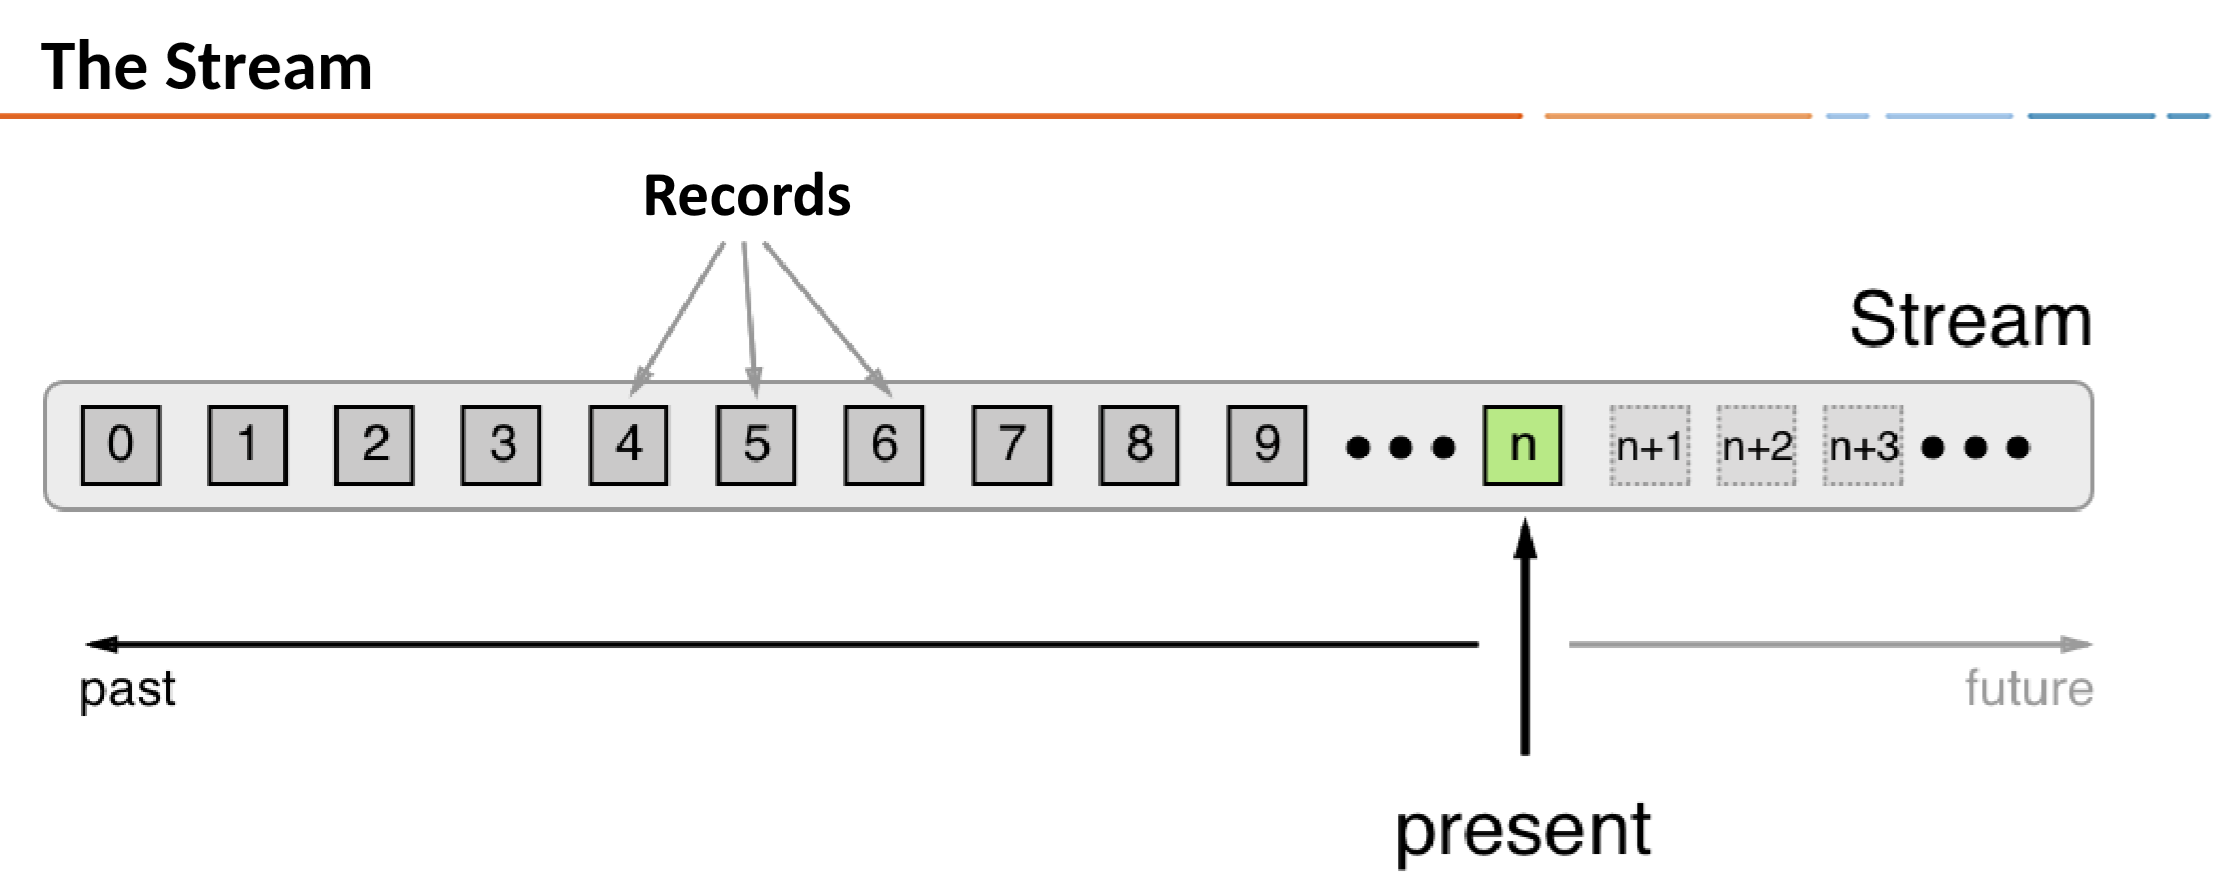 Diagram showing records in a ksqlDB stream